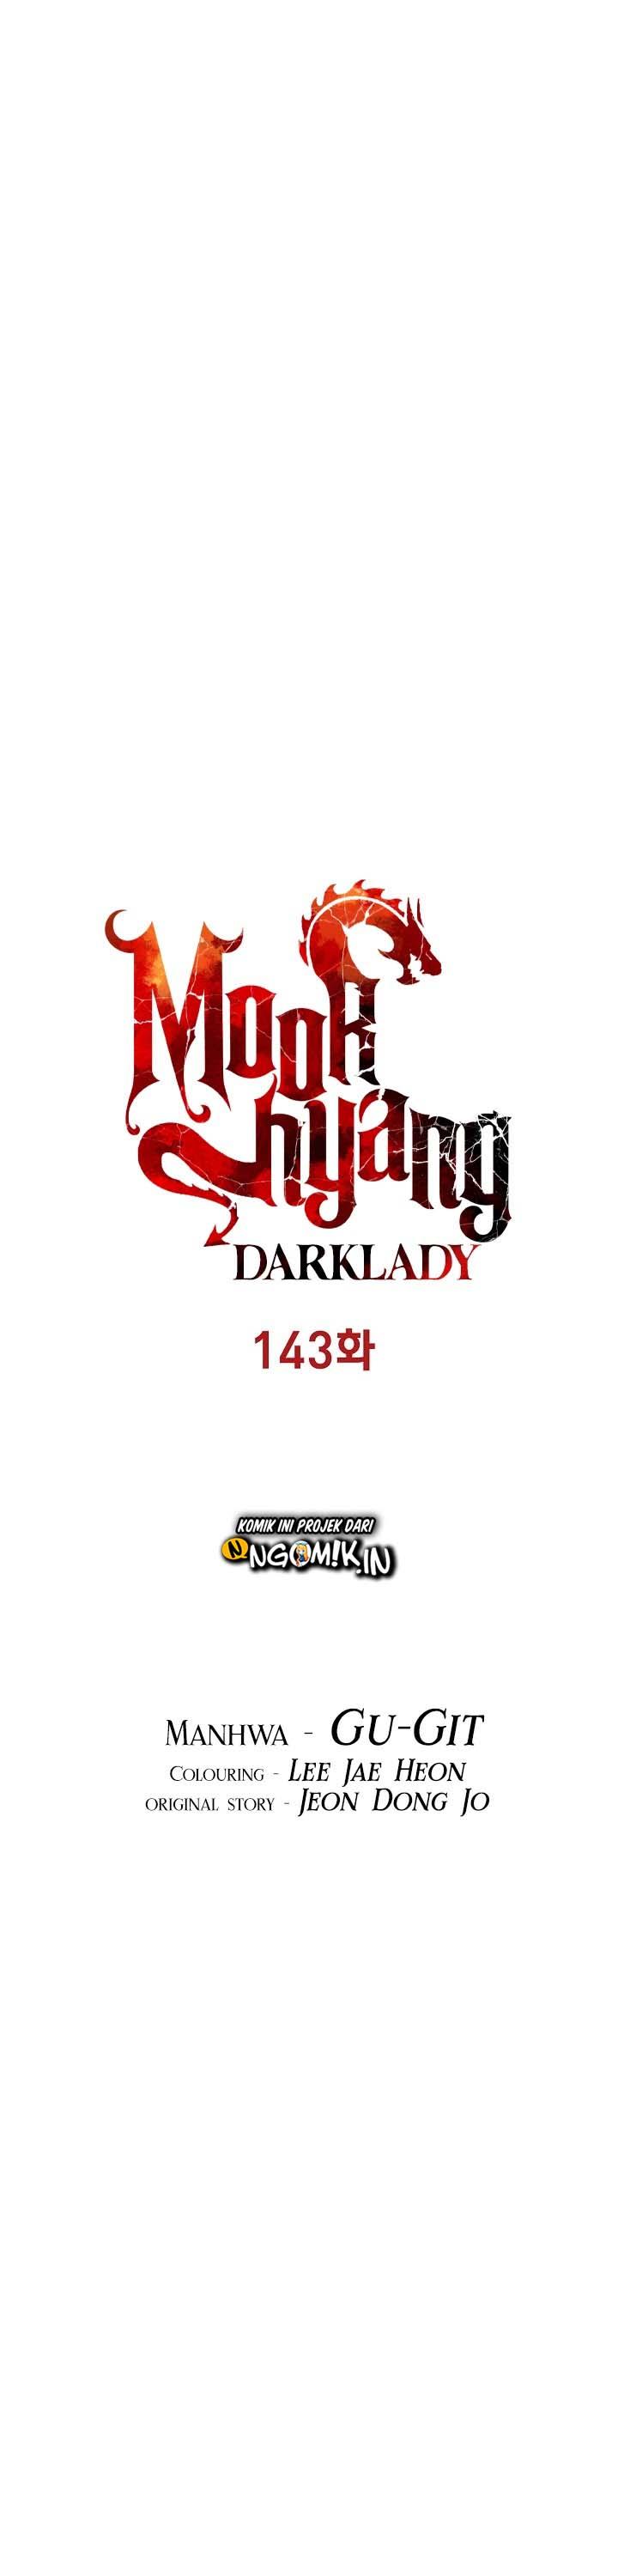 MookHyang – Dark Lady Chapter 143